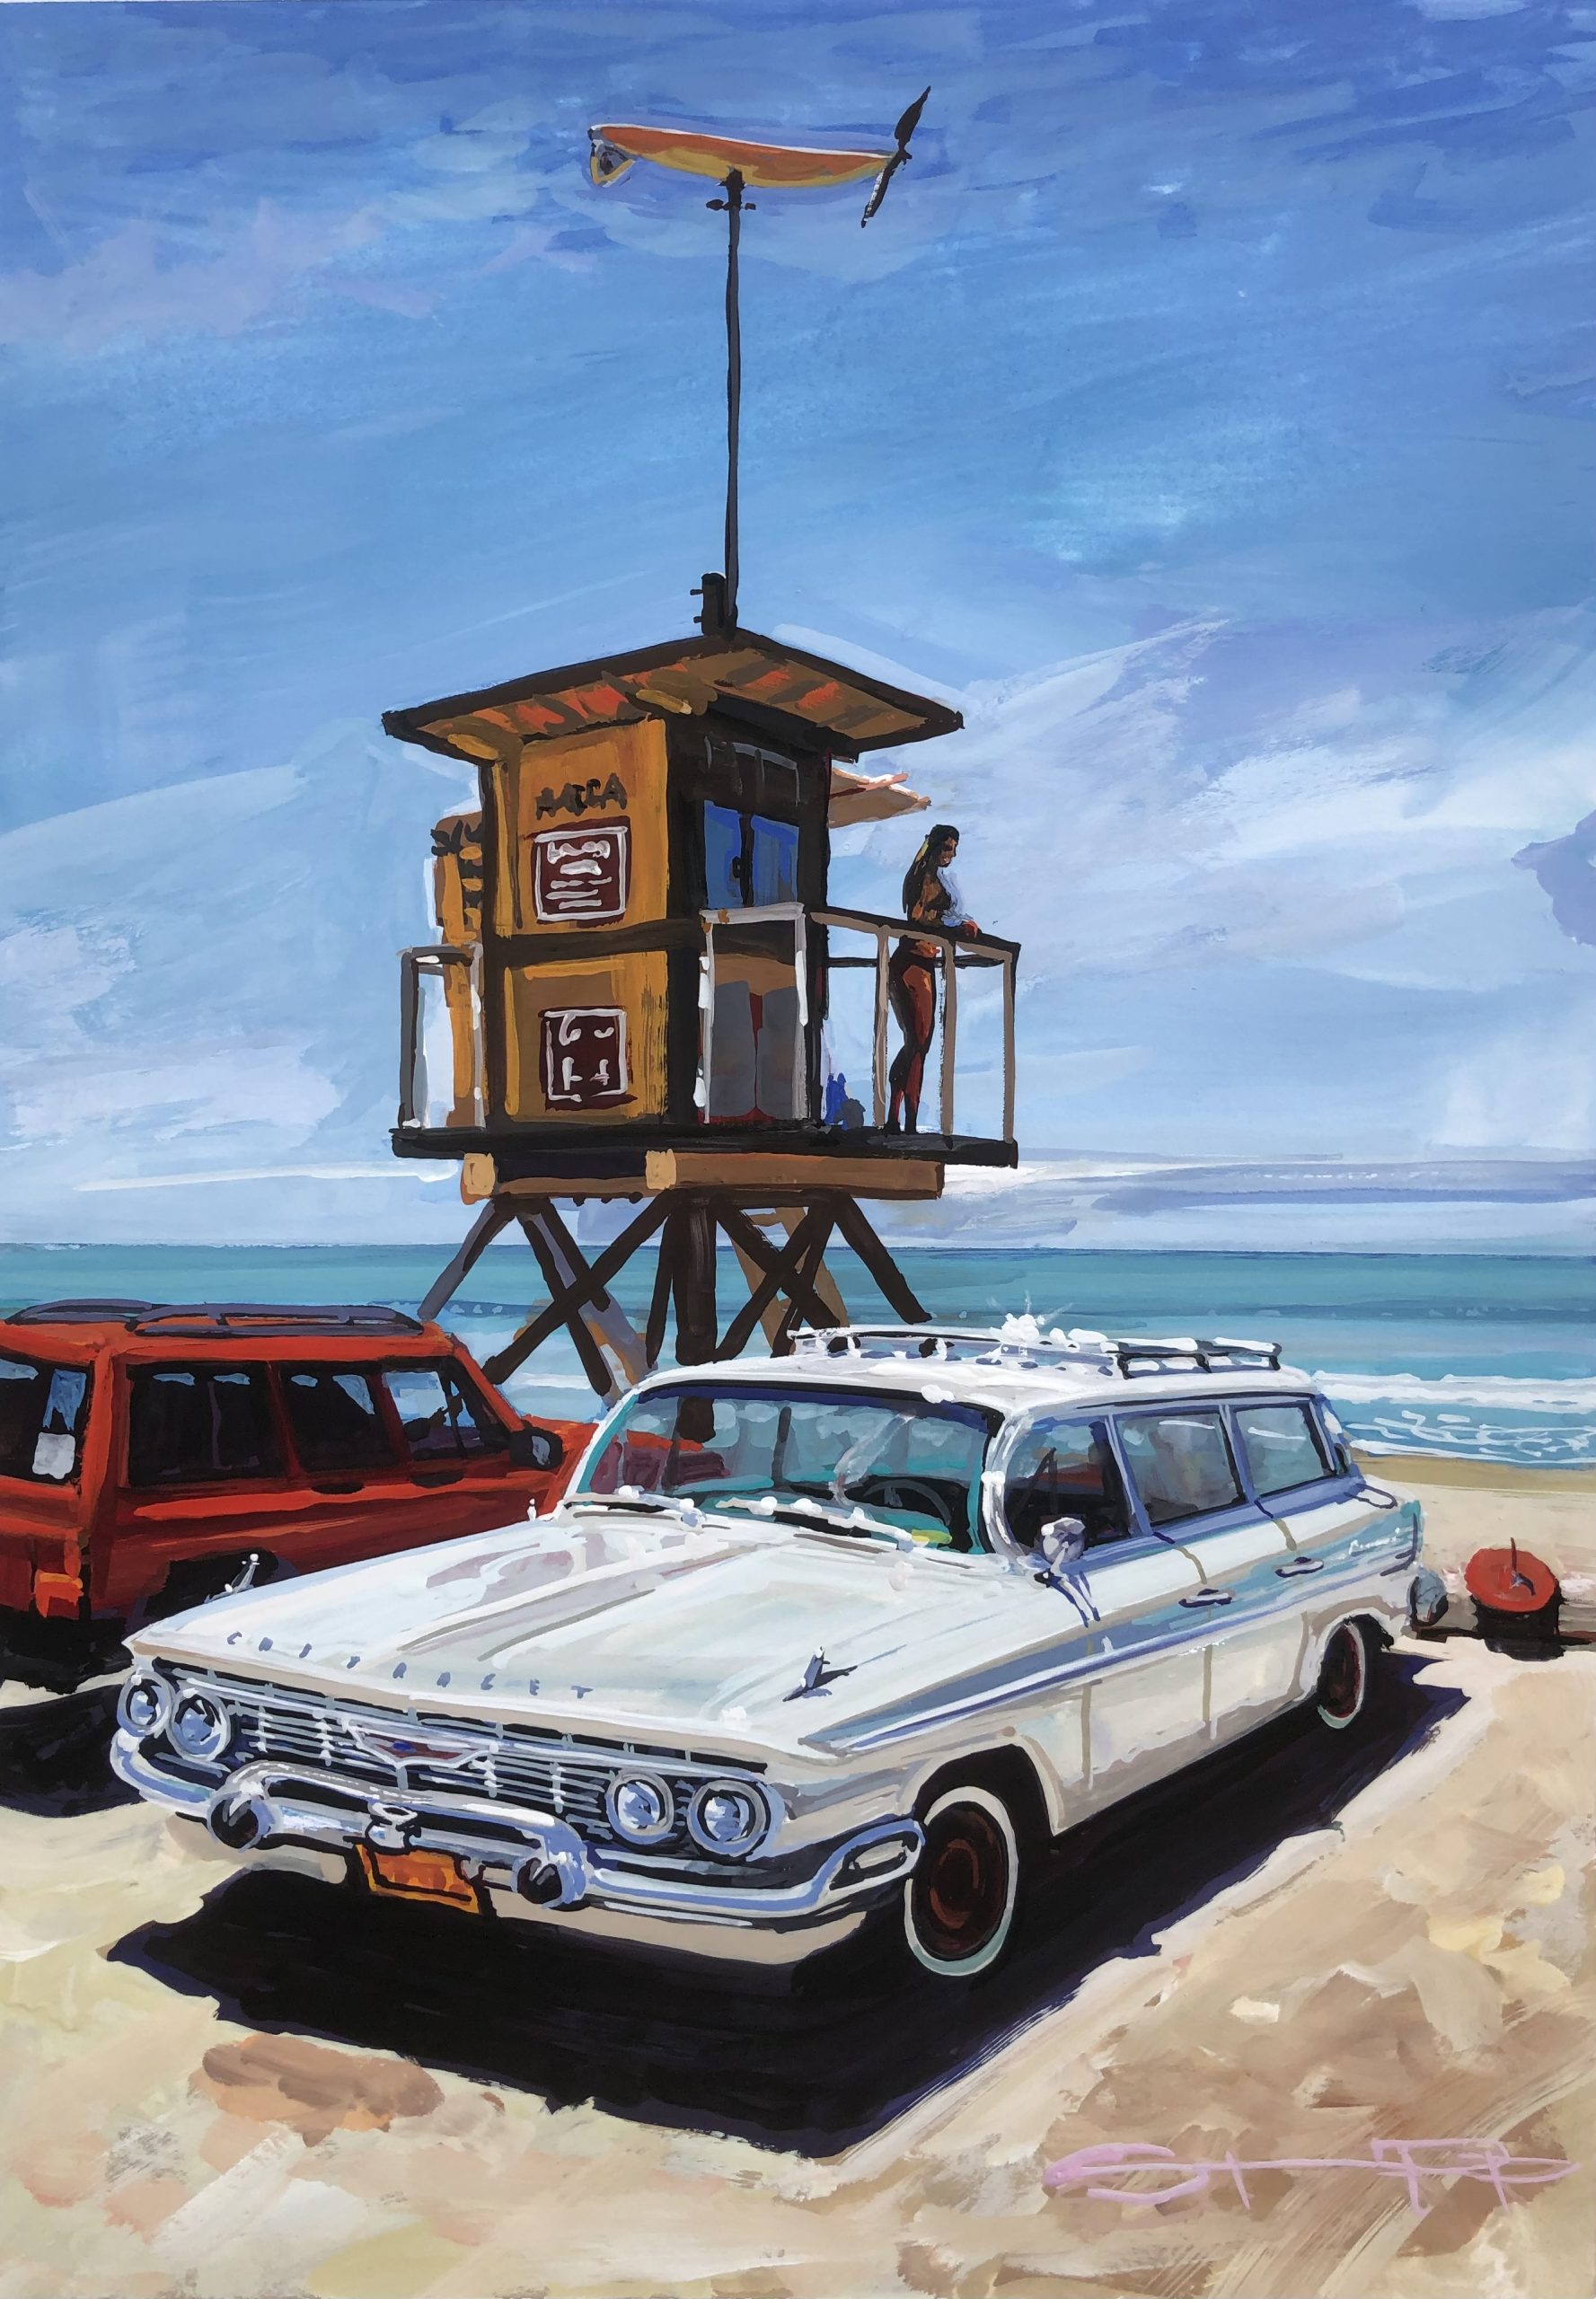 Classic American car parked in front of the lifeguard tower